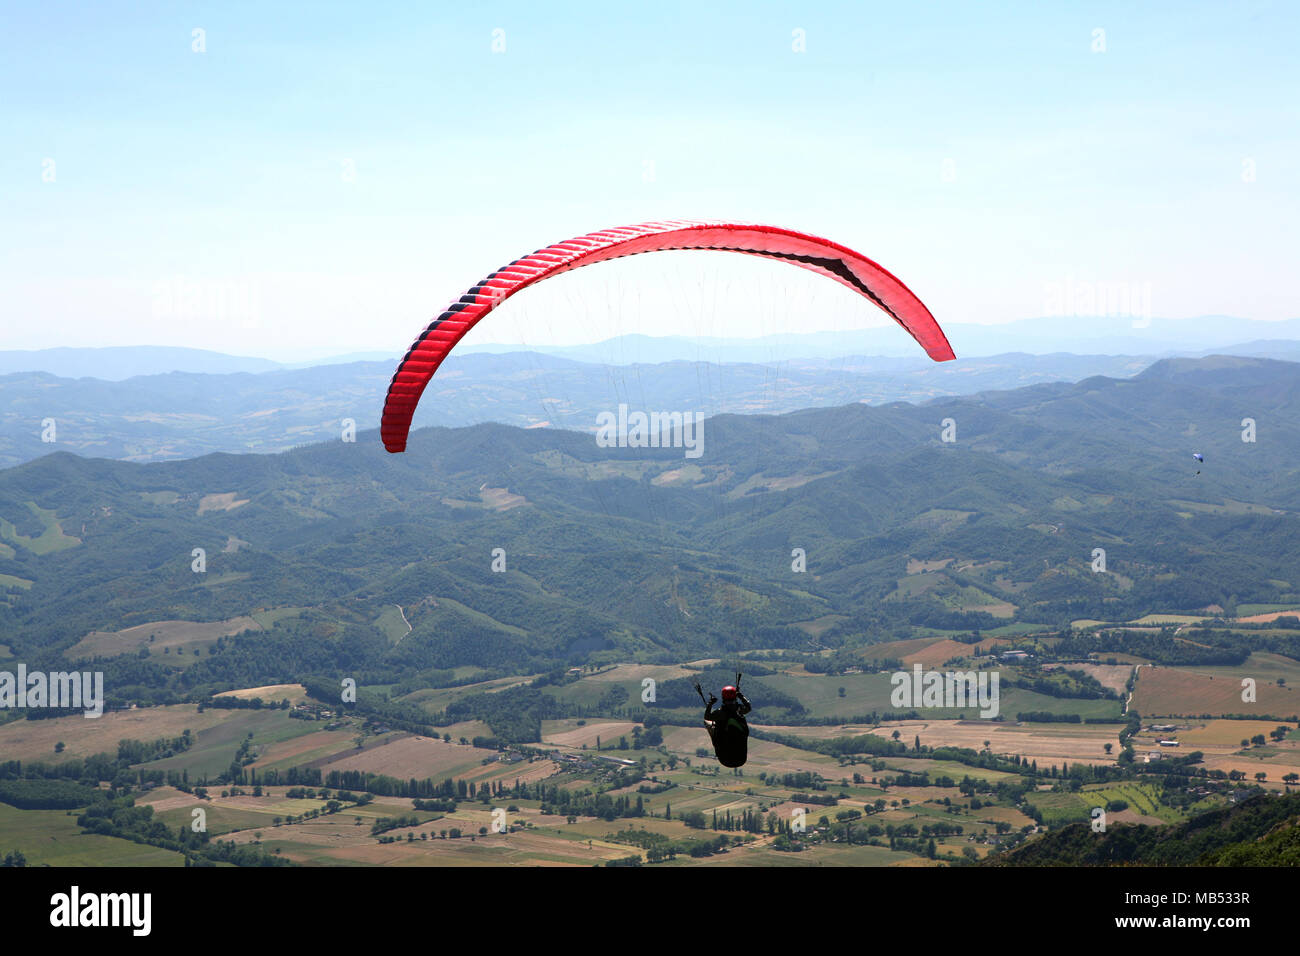 Paragliding in the mountains Stock Photo